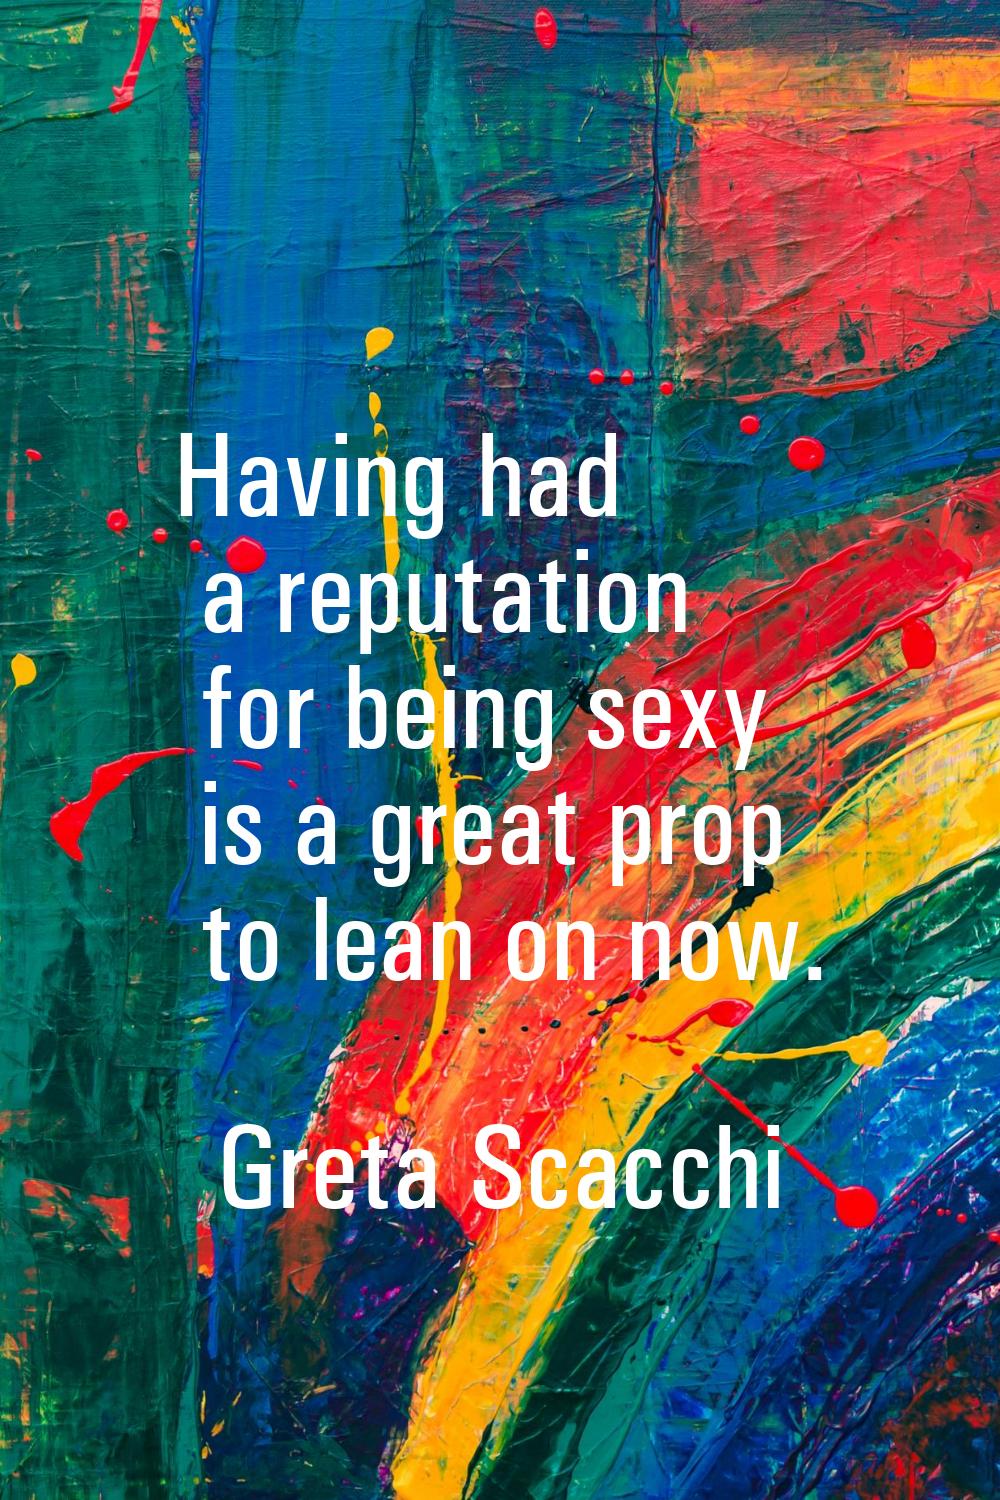 Having had a reputation for being sexy is a great prop to lean on now.